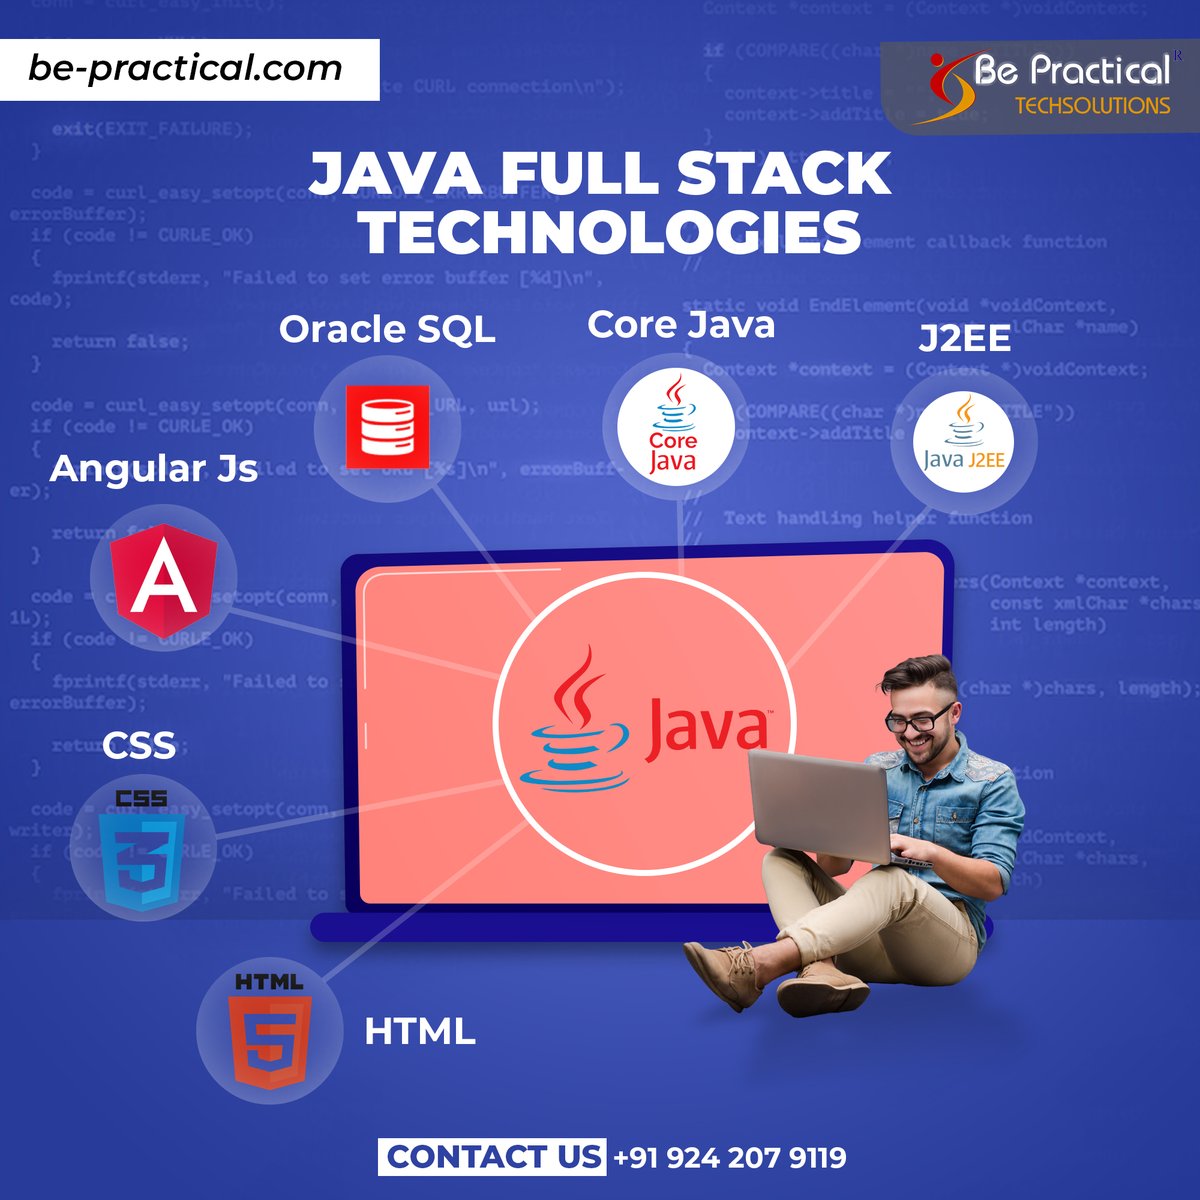 Elevate your skills with Be Practical's Java full stack developer course. Delve into core Java, HTML, CSS, and Oracle SQL essentials. Empower your career in tech. Join us today!

#TrainingInstitute #oracle #css #html #corejava #skills #sucess  #Java  #CareerGrowth  #developer